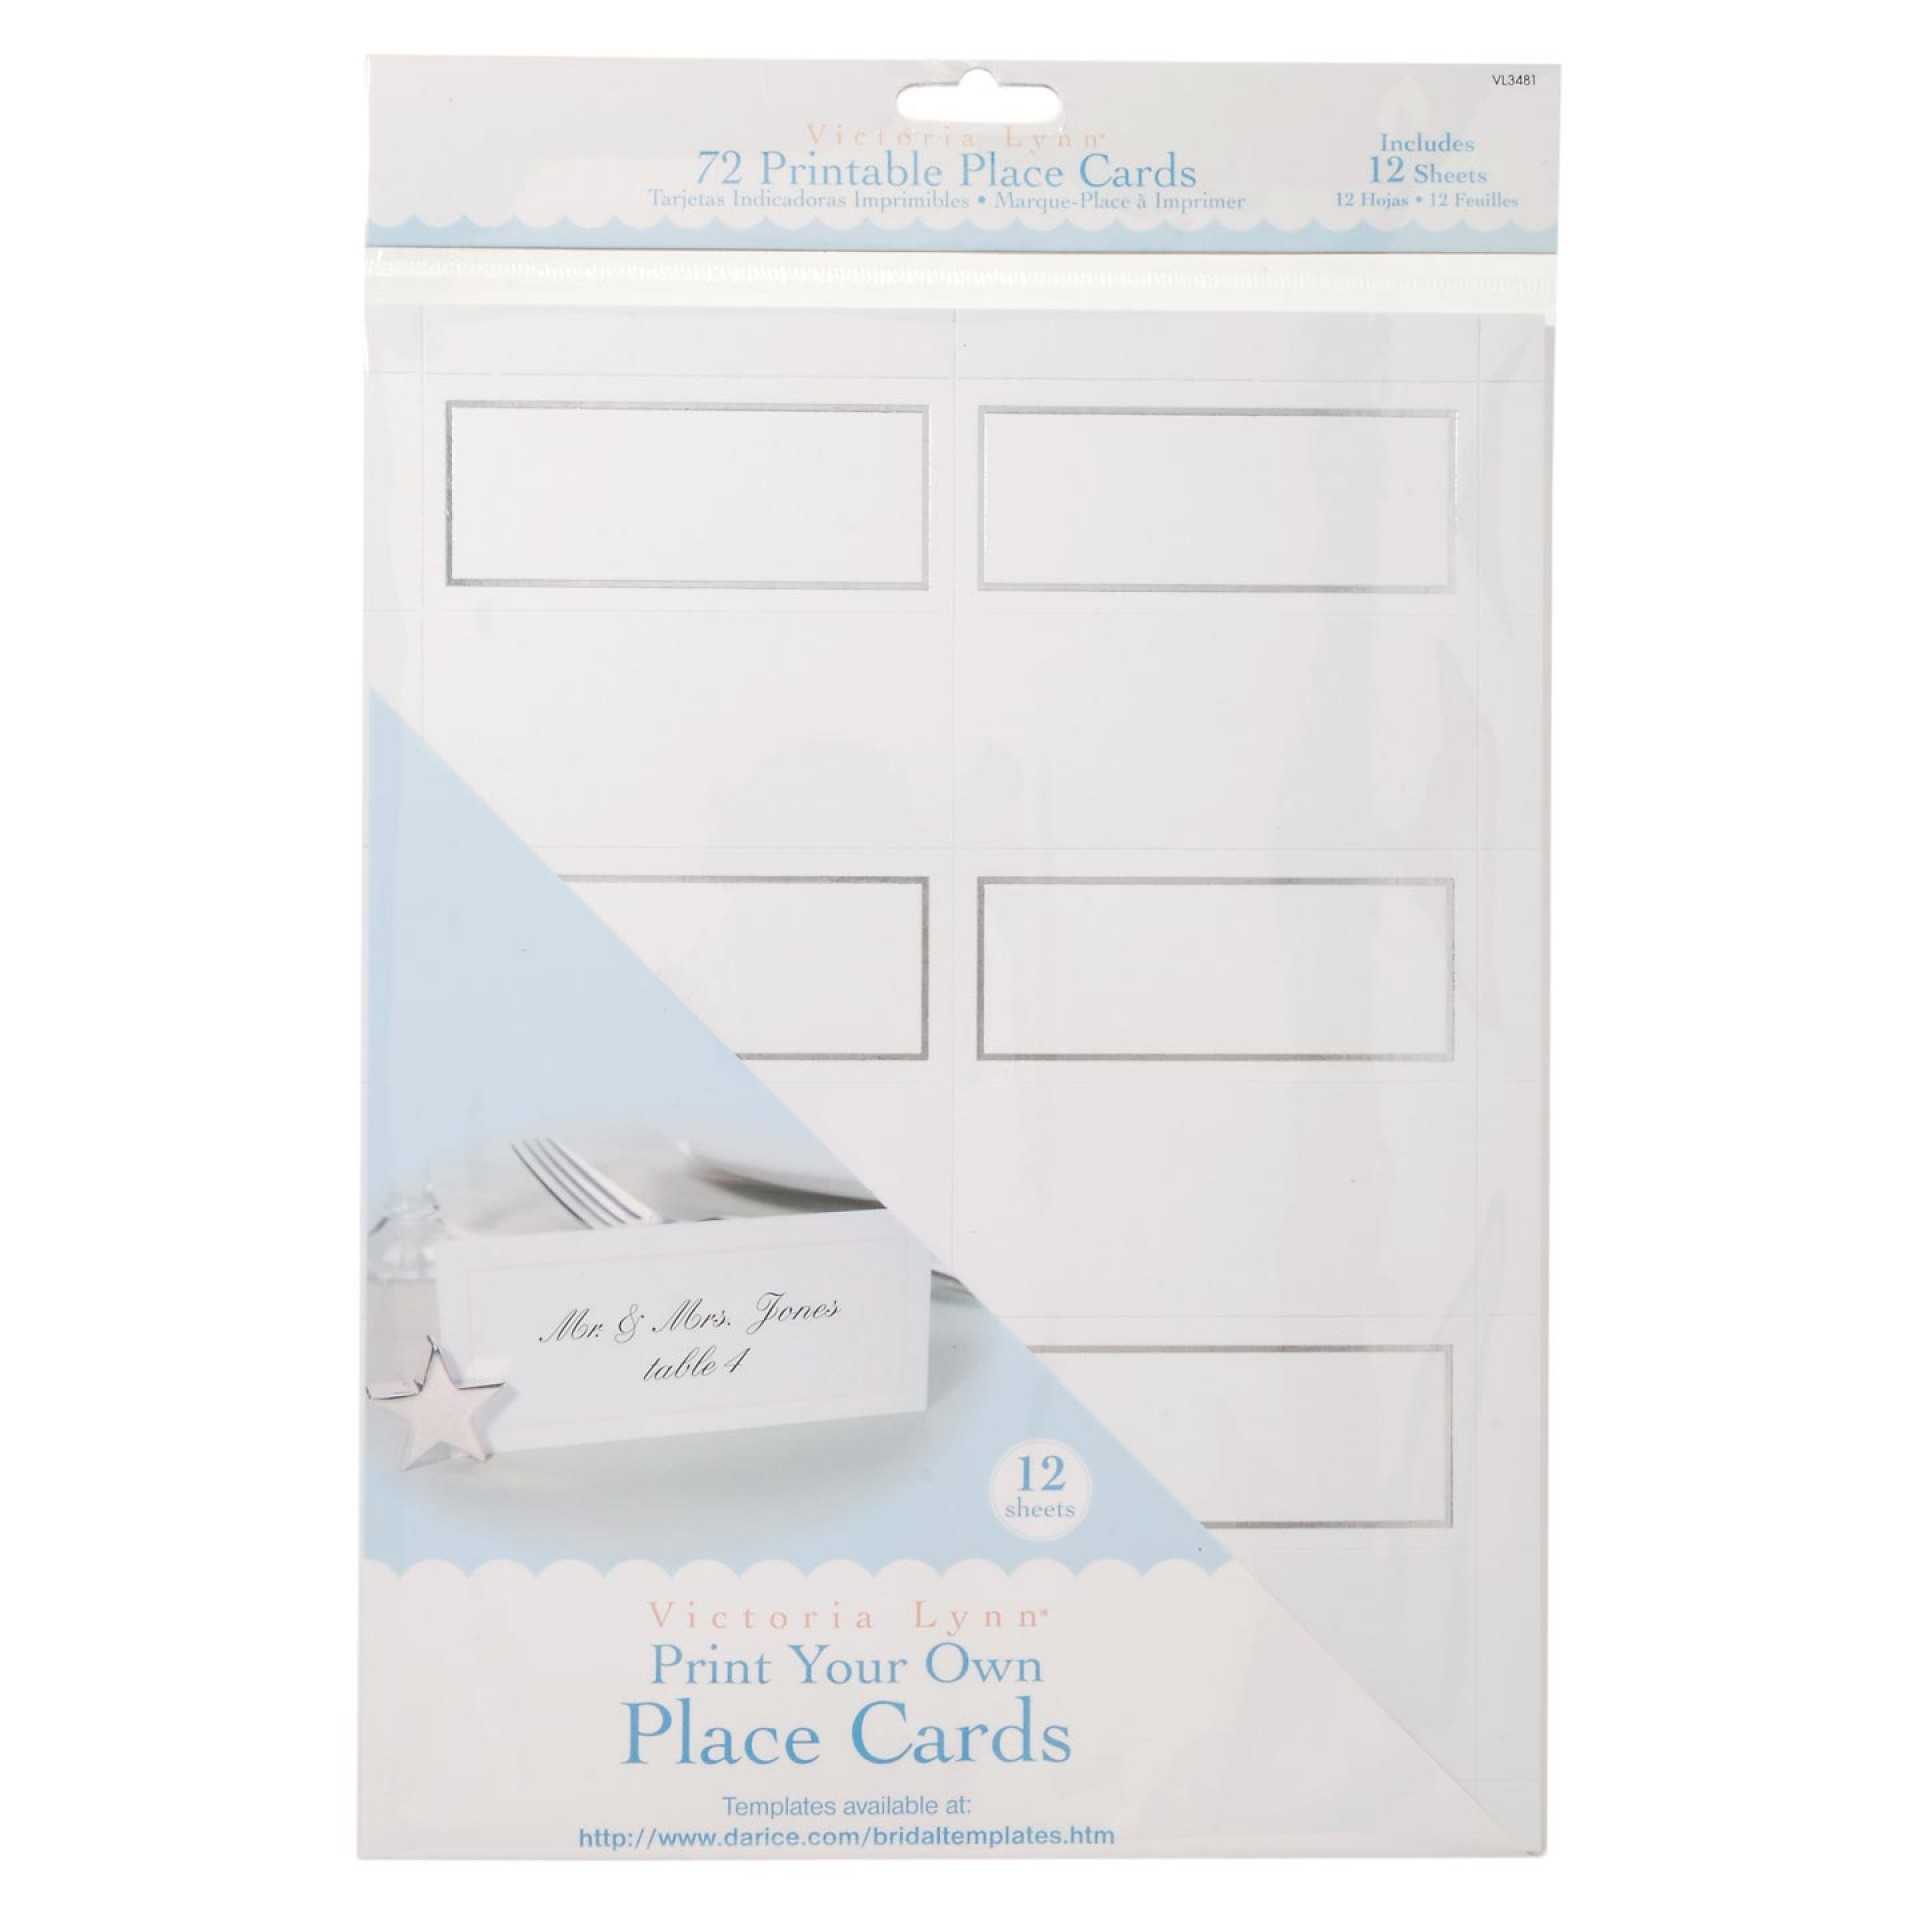 023 Template Ideas Card Printable Place Breathtaking Cards With Regard To Paper Source Templates Place Cards